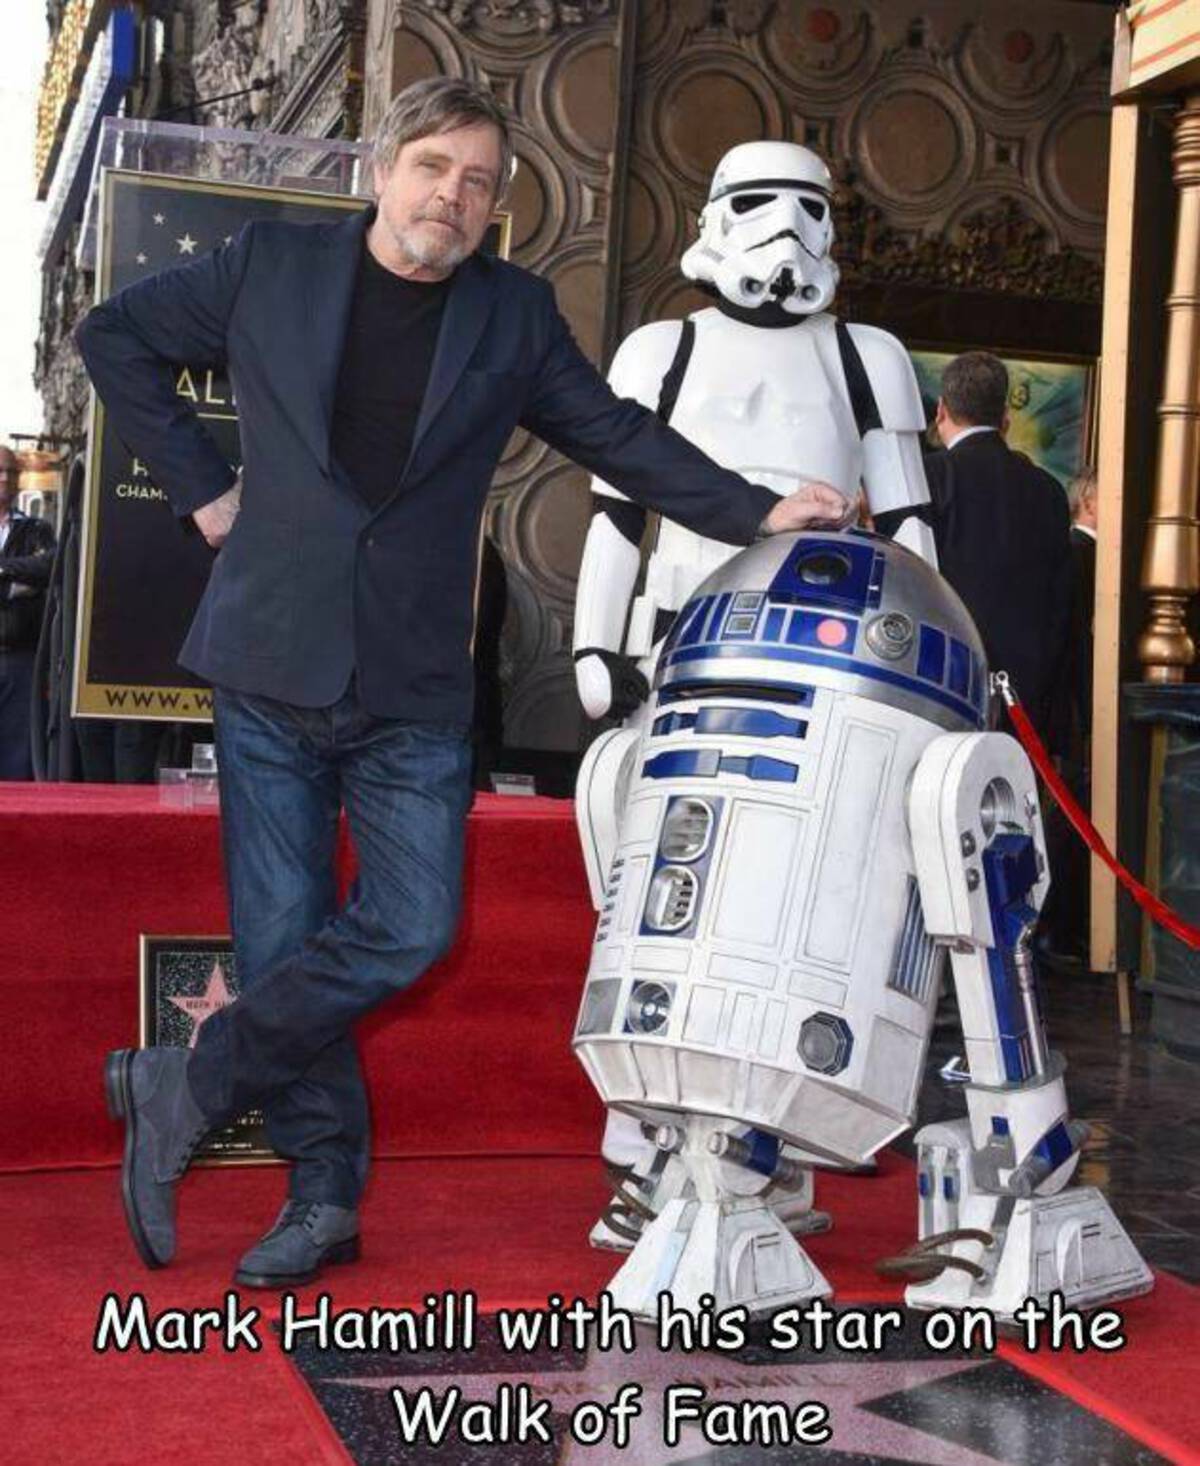 r2-d2 - Cham. Al Meth Han Mark Hamill with his star on the Walk of Fame